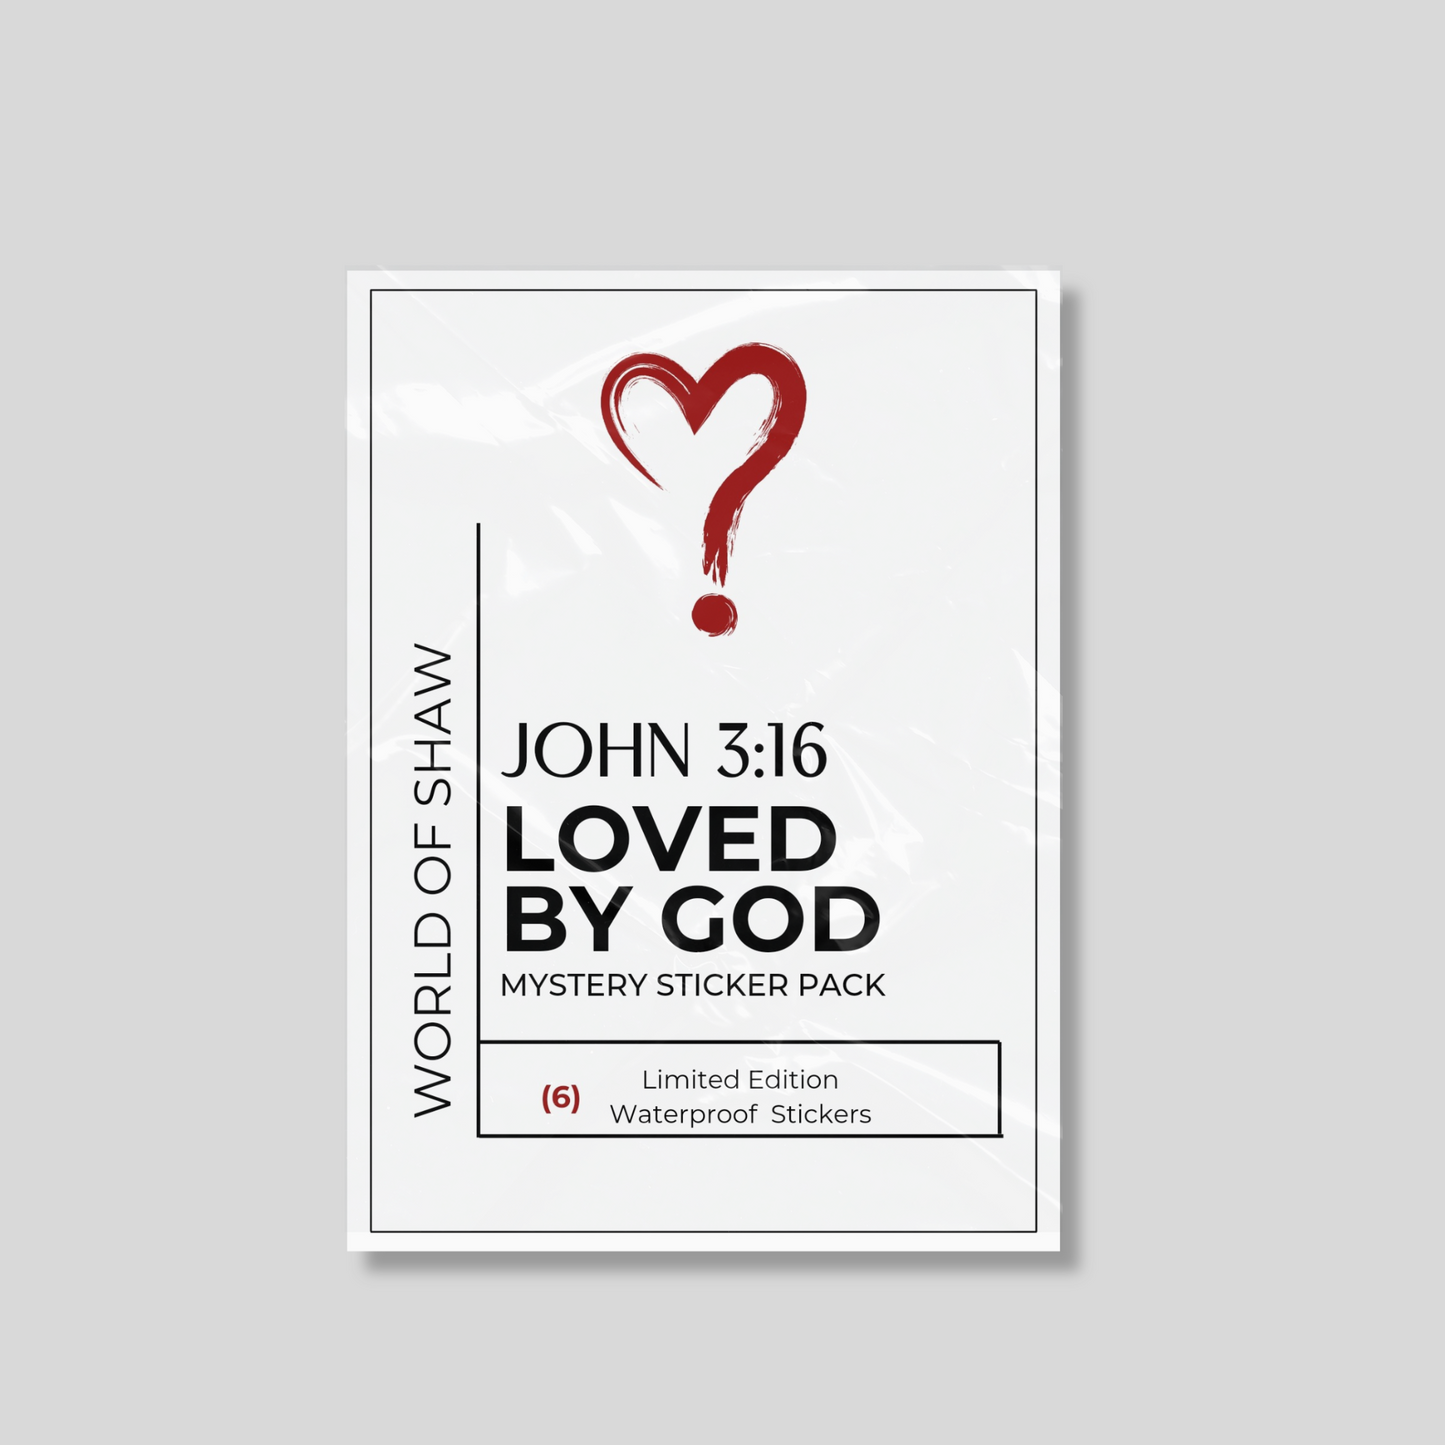 John 3:16 LOVED BY GOD Mystery Sticker Pack (Limited Edition)